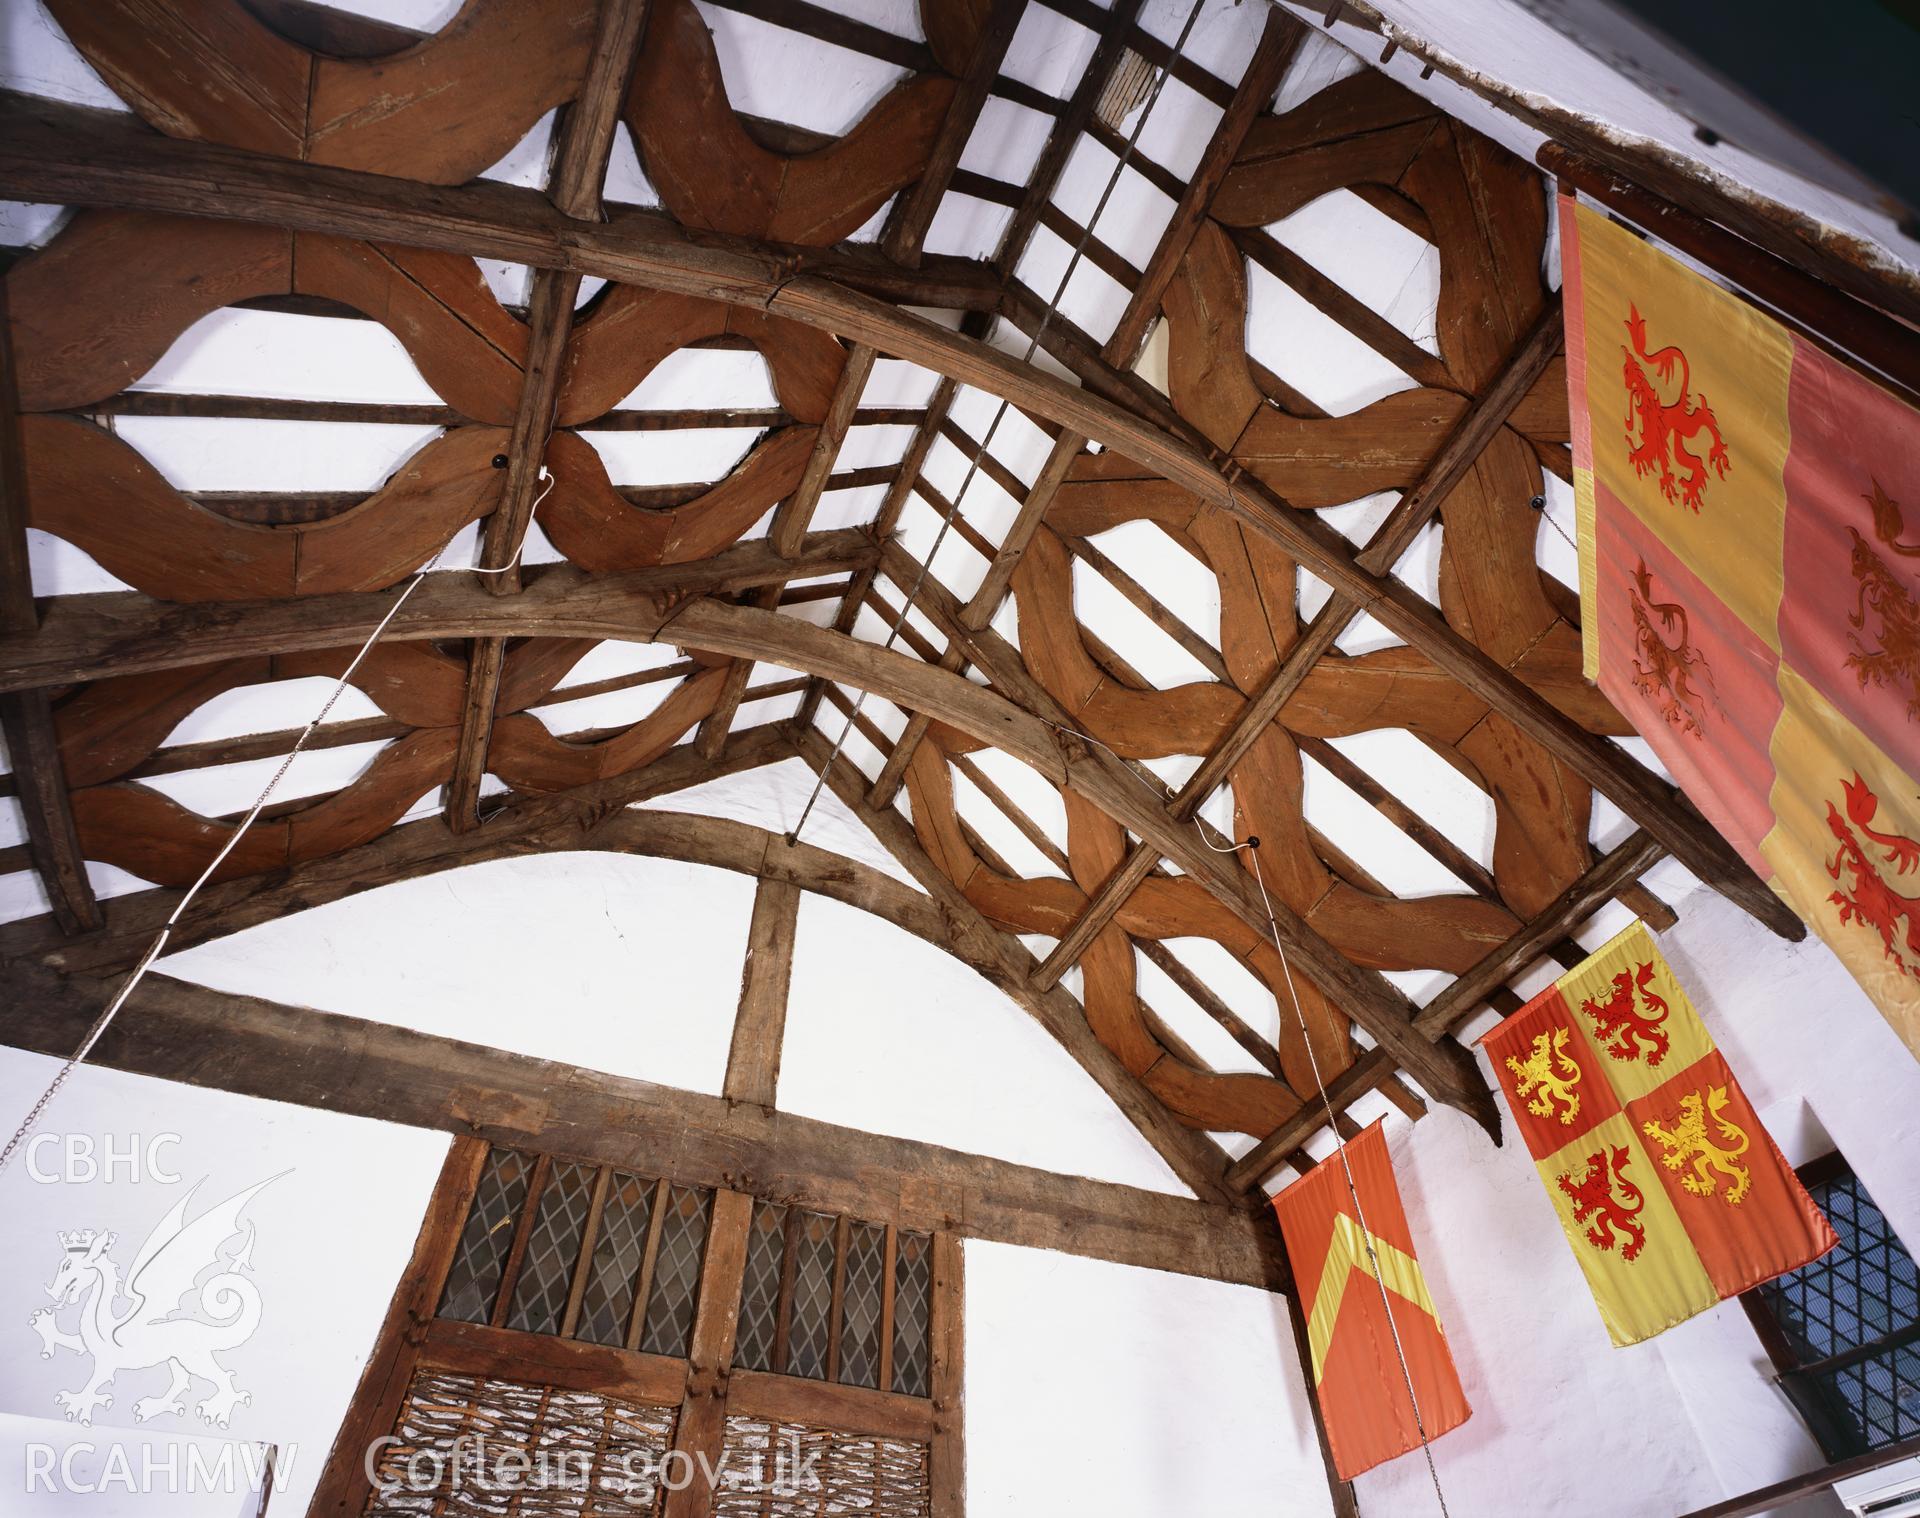 RCAHMW colour transparency showing interior view of the roof at Parliament House, Machynlleth, taken by I.N. Wright, 2004